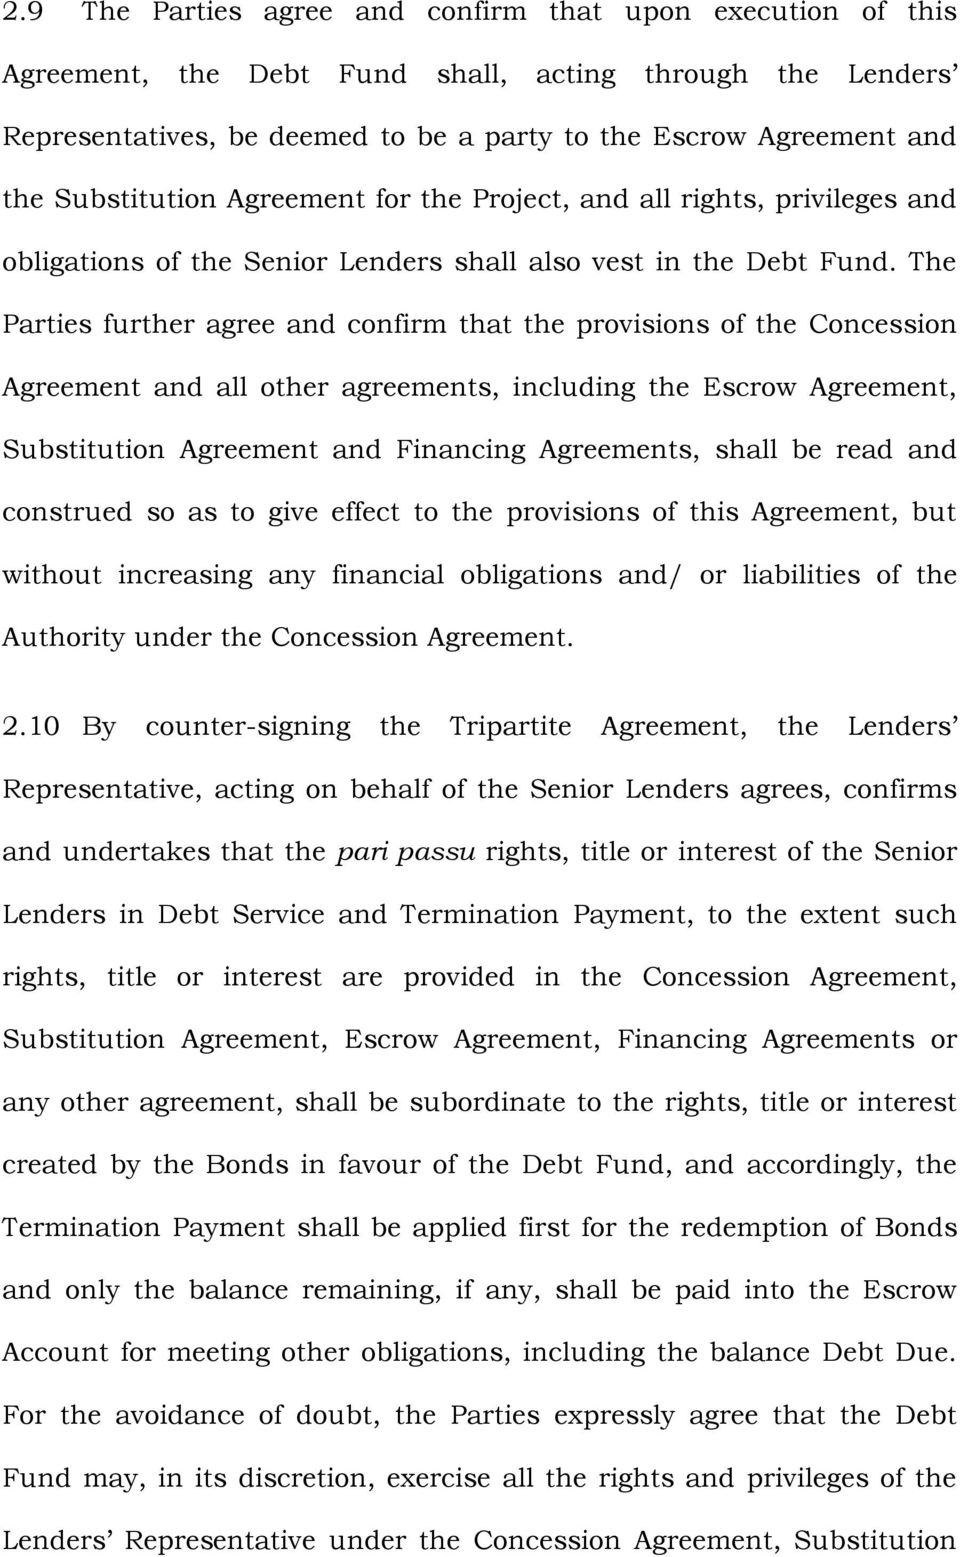 The Parties further agree and confirm that the provisions of the Concession Agreement and all other agreements, including the Escrow Agreement, Substitution Agreement and Financing Agreements, shall